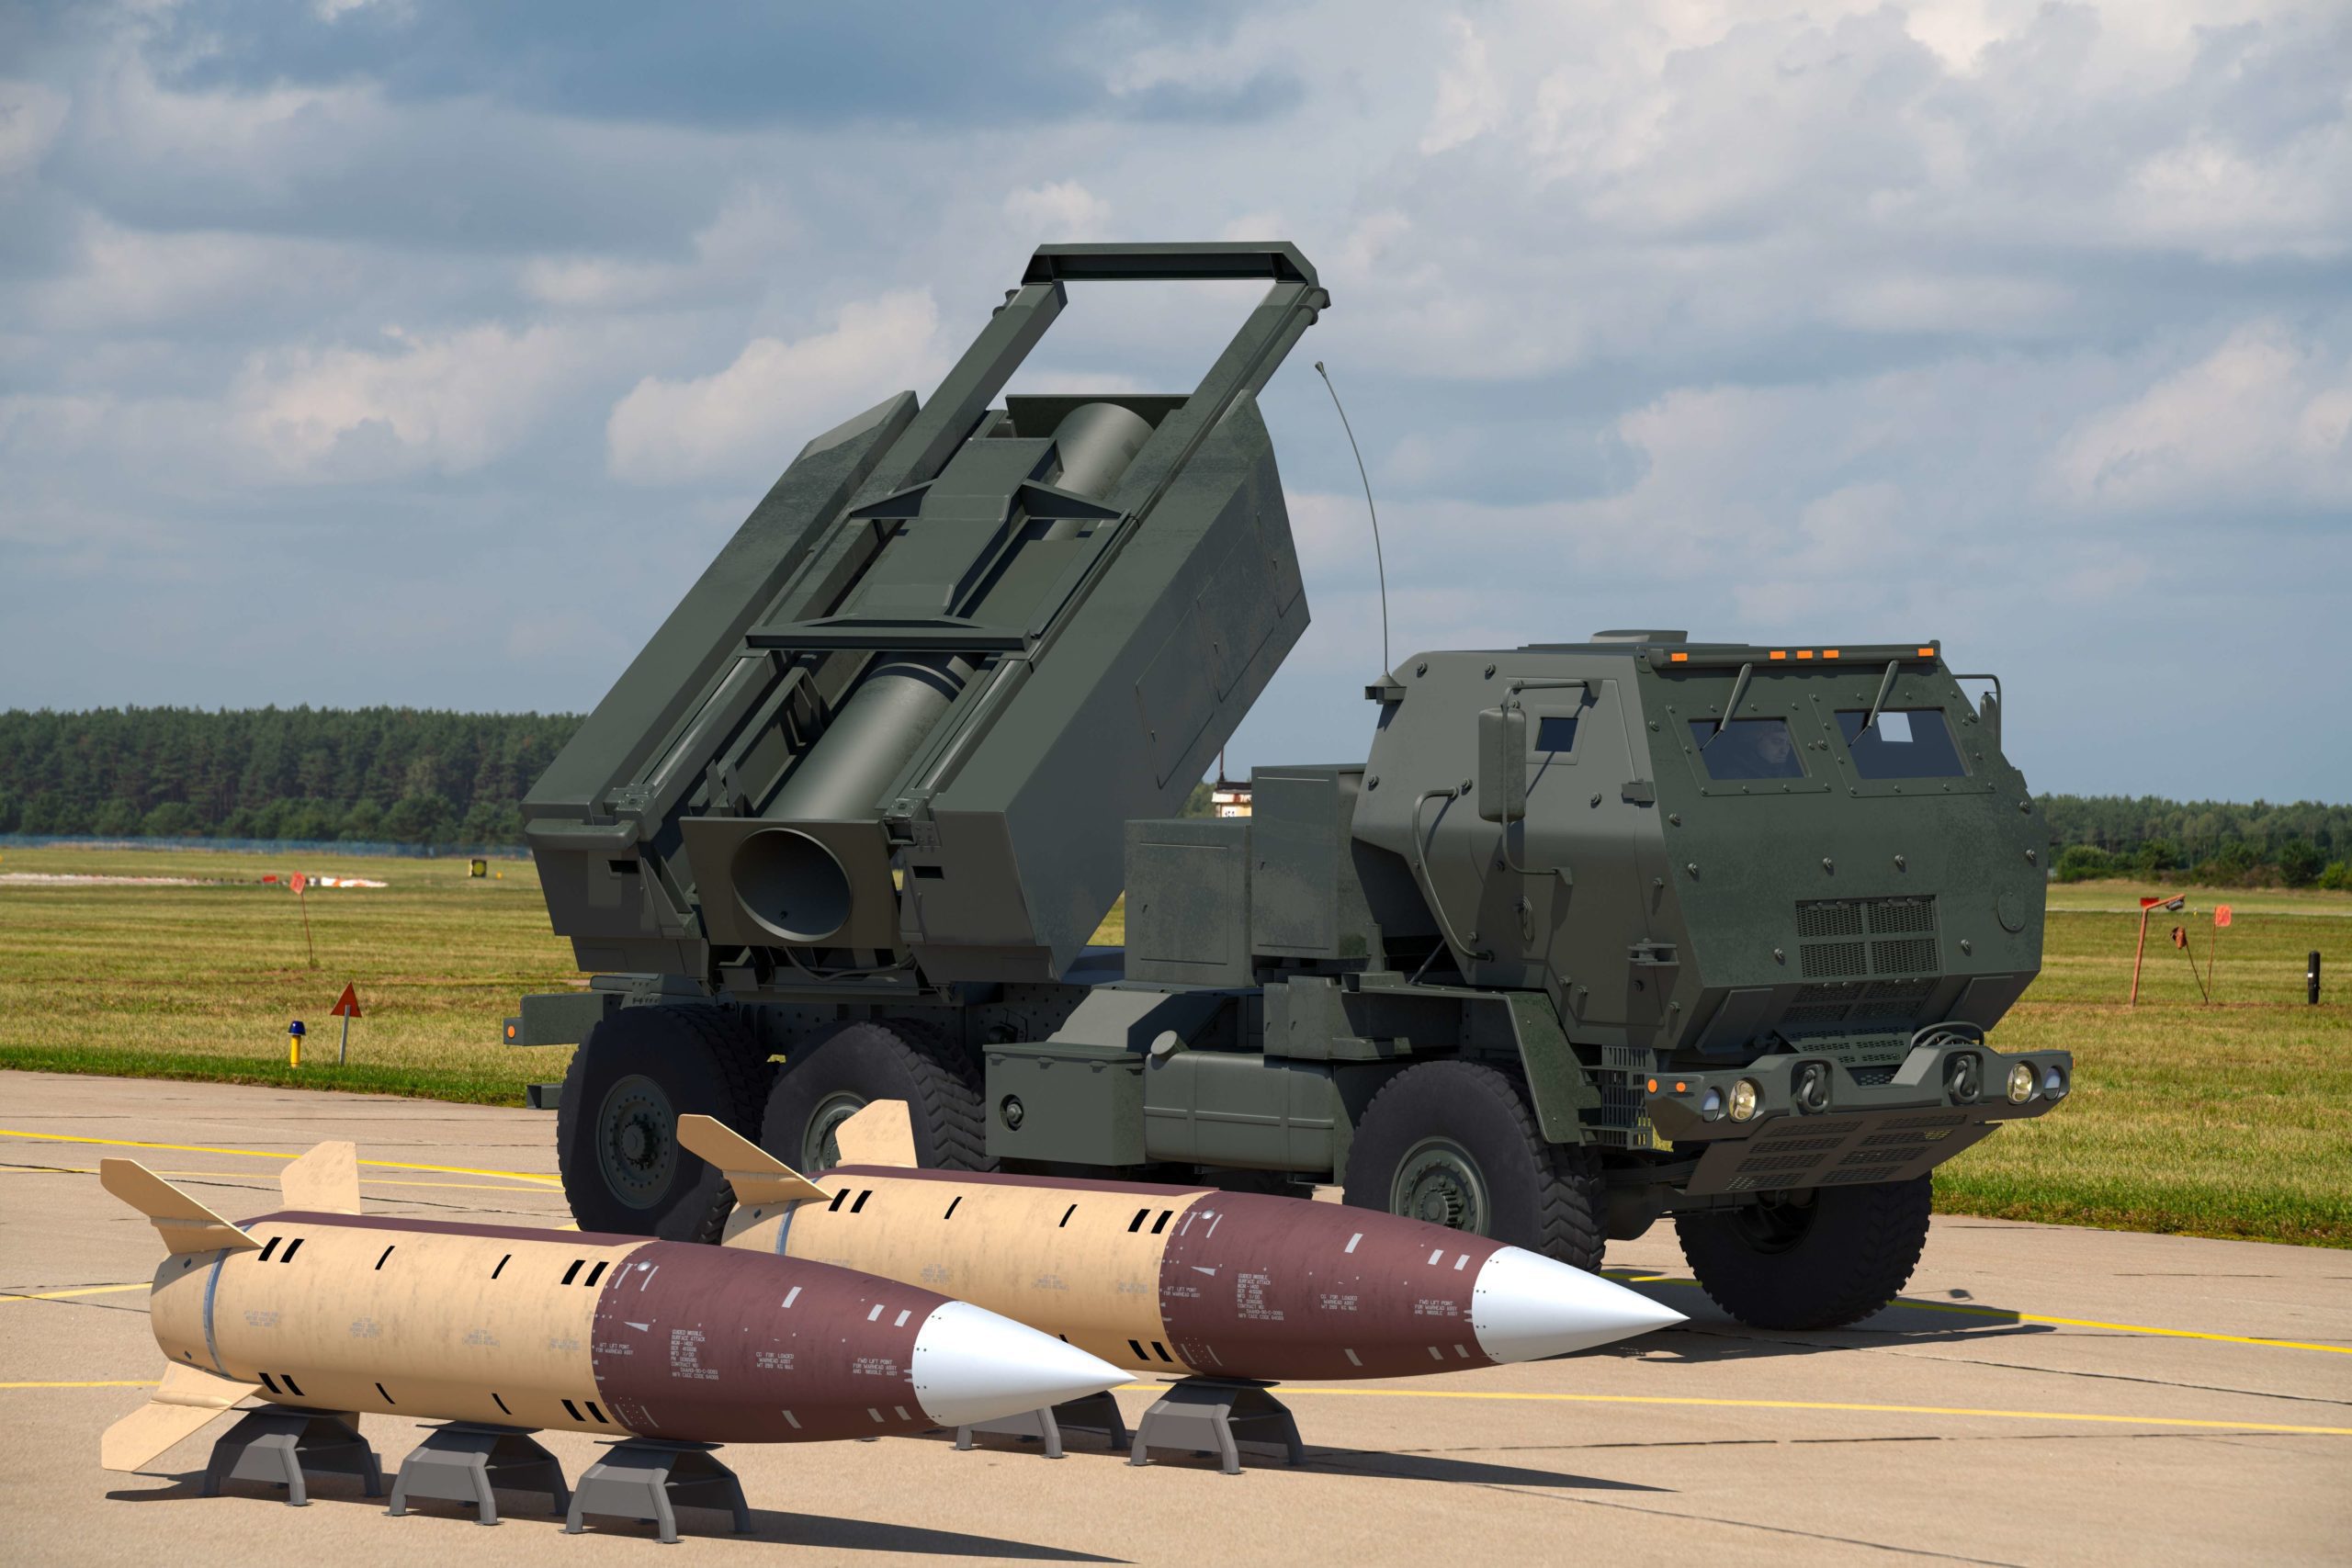 Texas Based Missile System a 'Game Changer'